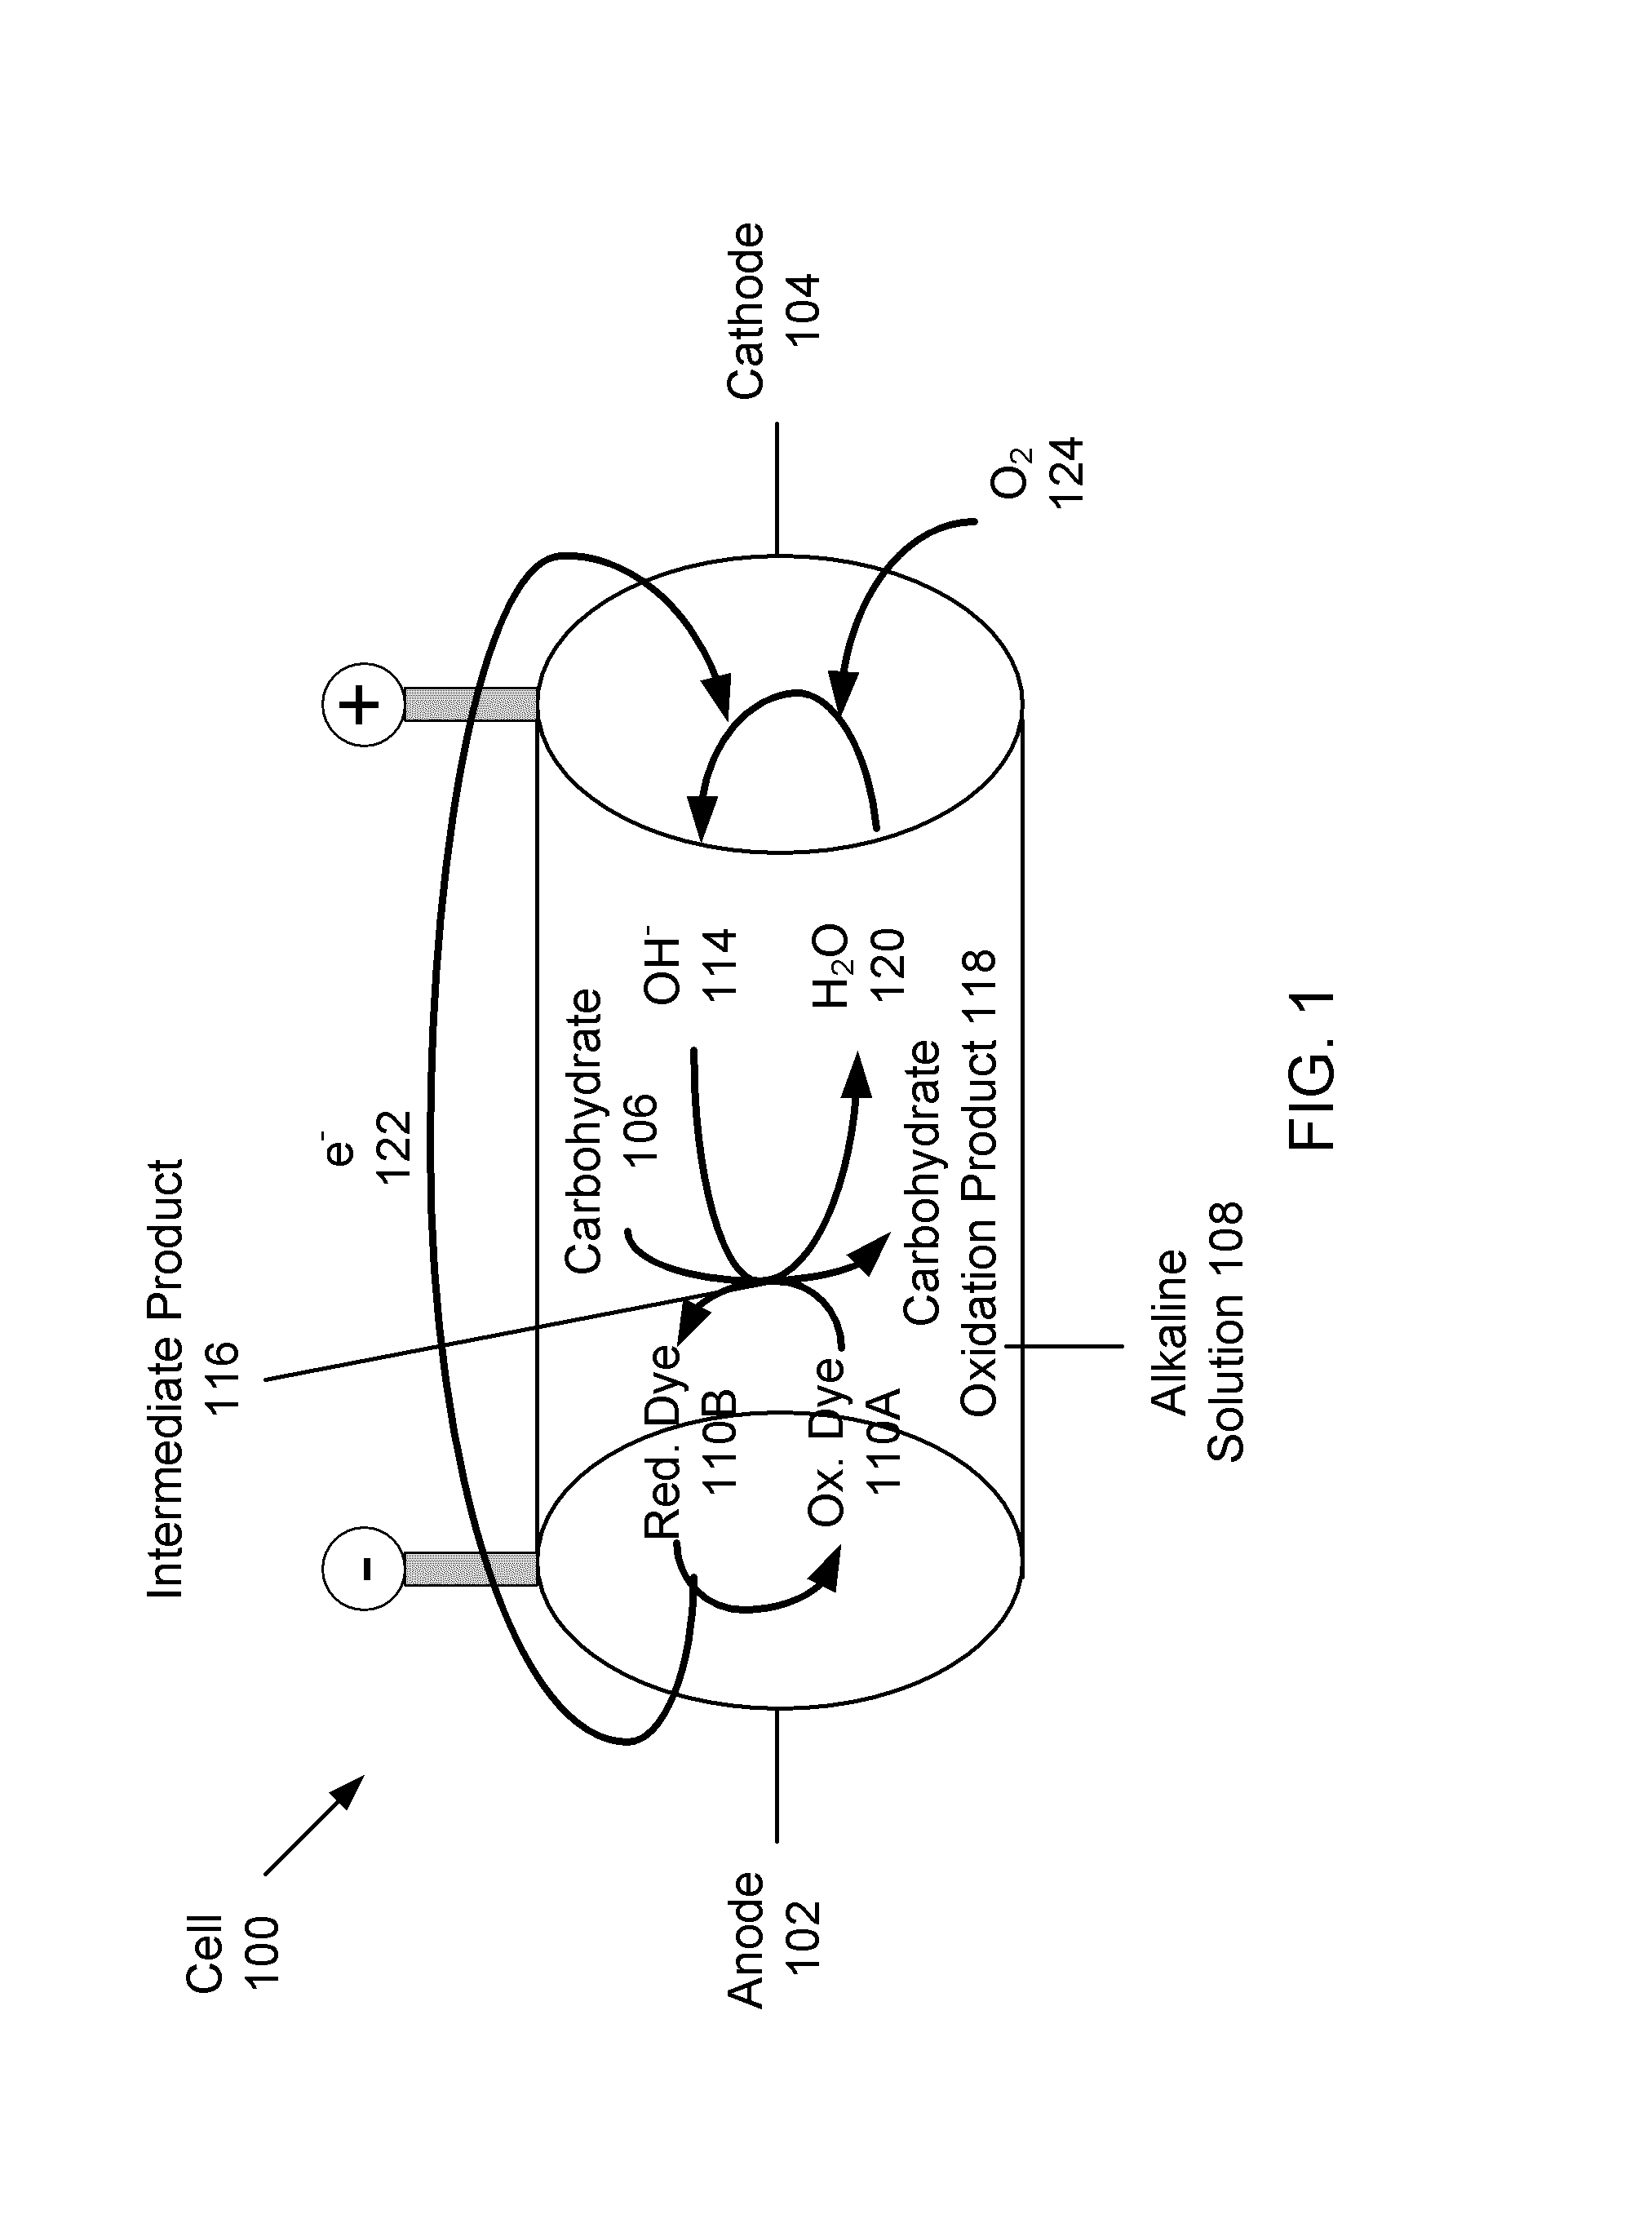 Systems and methods for carbohydrate detection